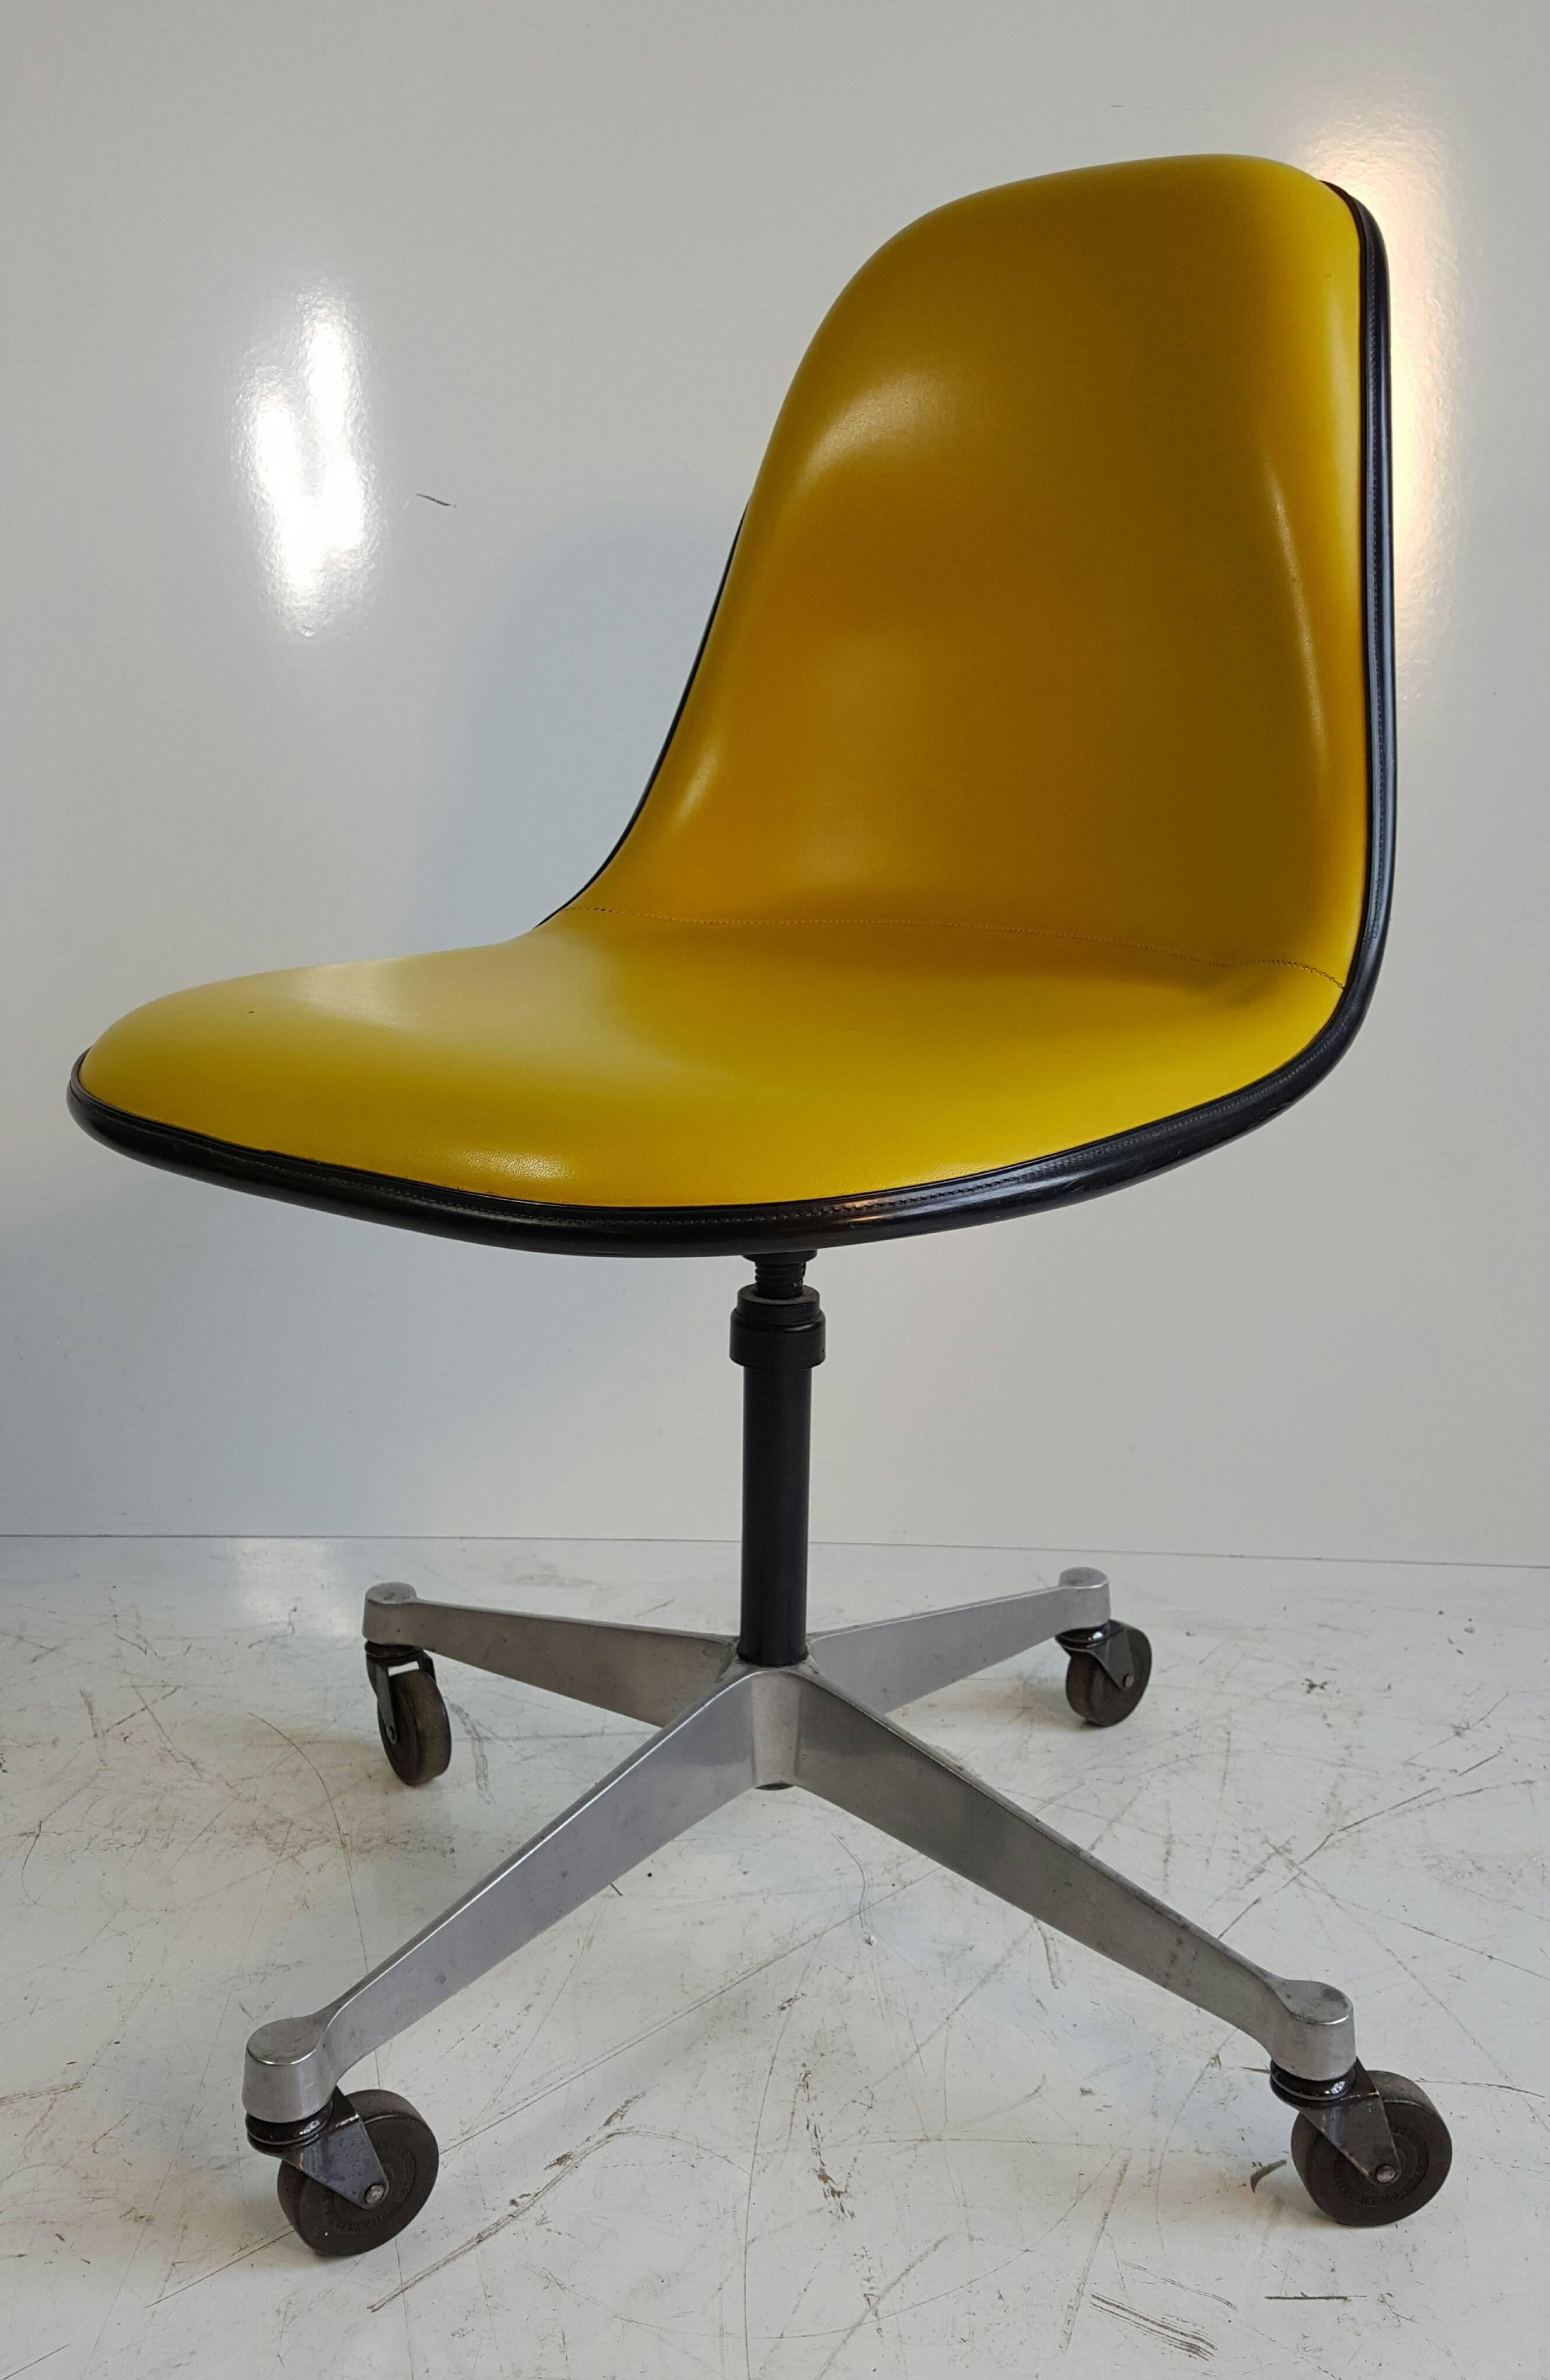 Rare PSCC desk chair designed by Charles & Ray Eames for Herman Miller Secretary Chair with original mustard yellow Naugahyde. Chair fully swivels. This chair was produced for a short time. Retains original Herman Miller label.